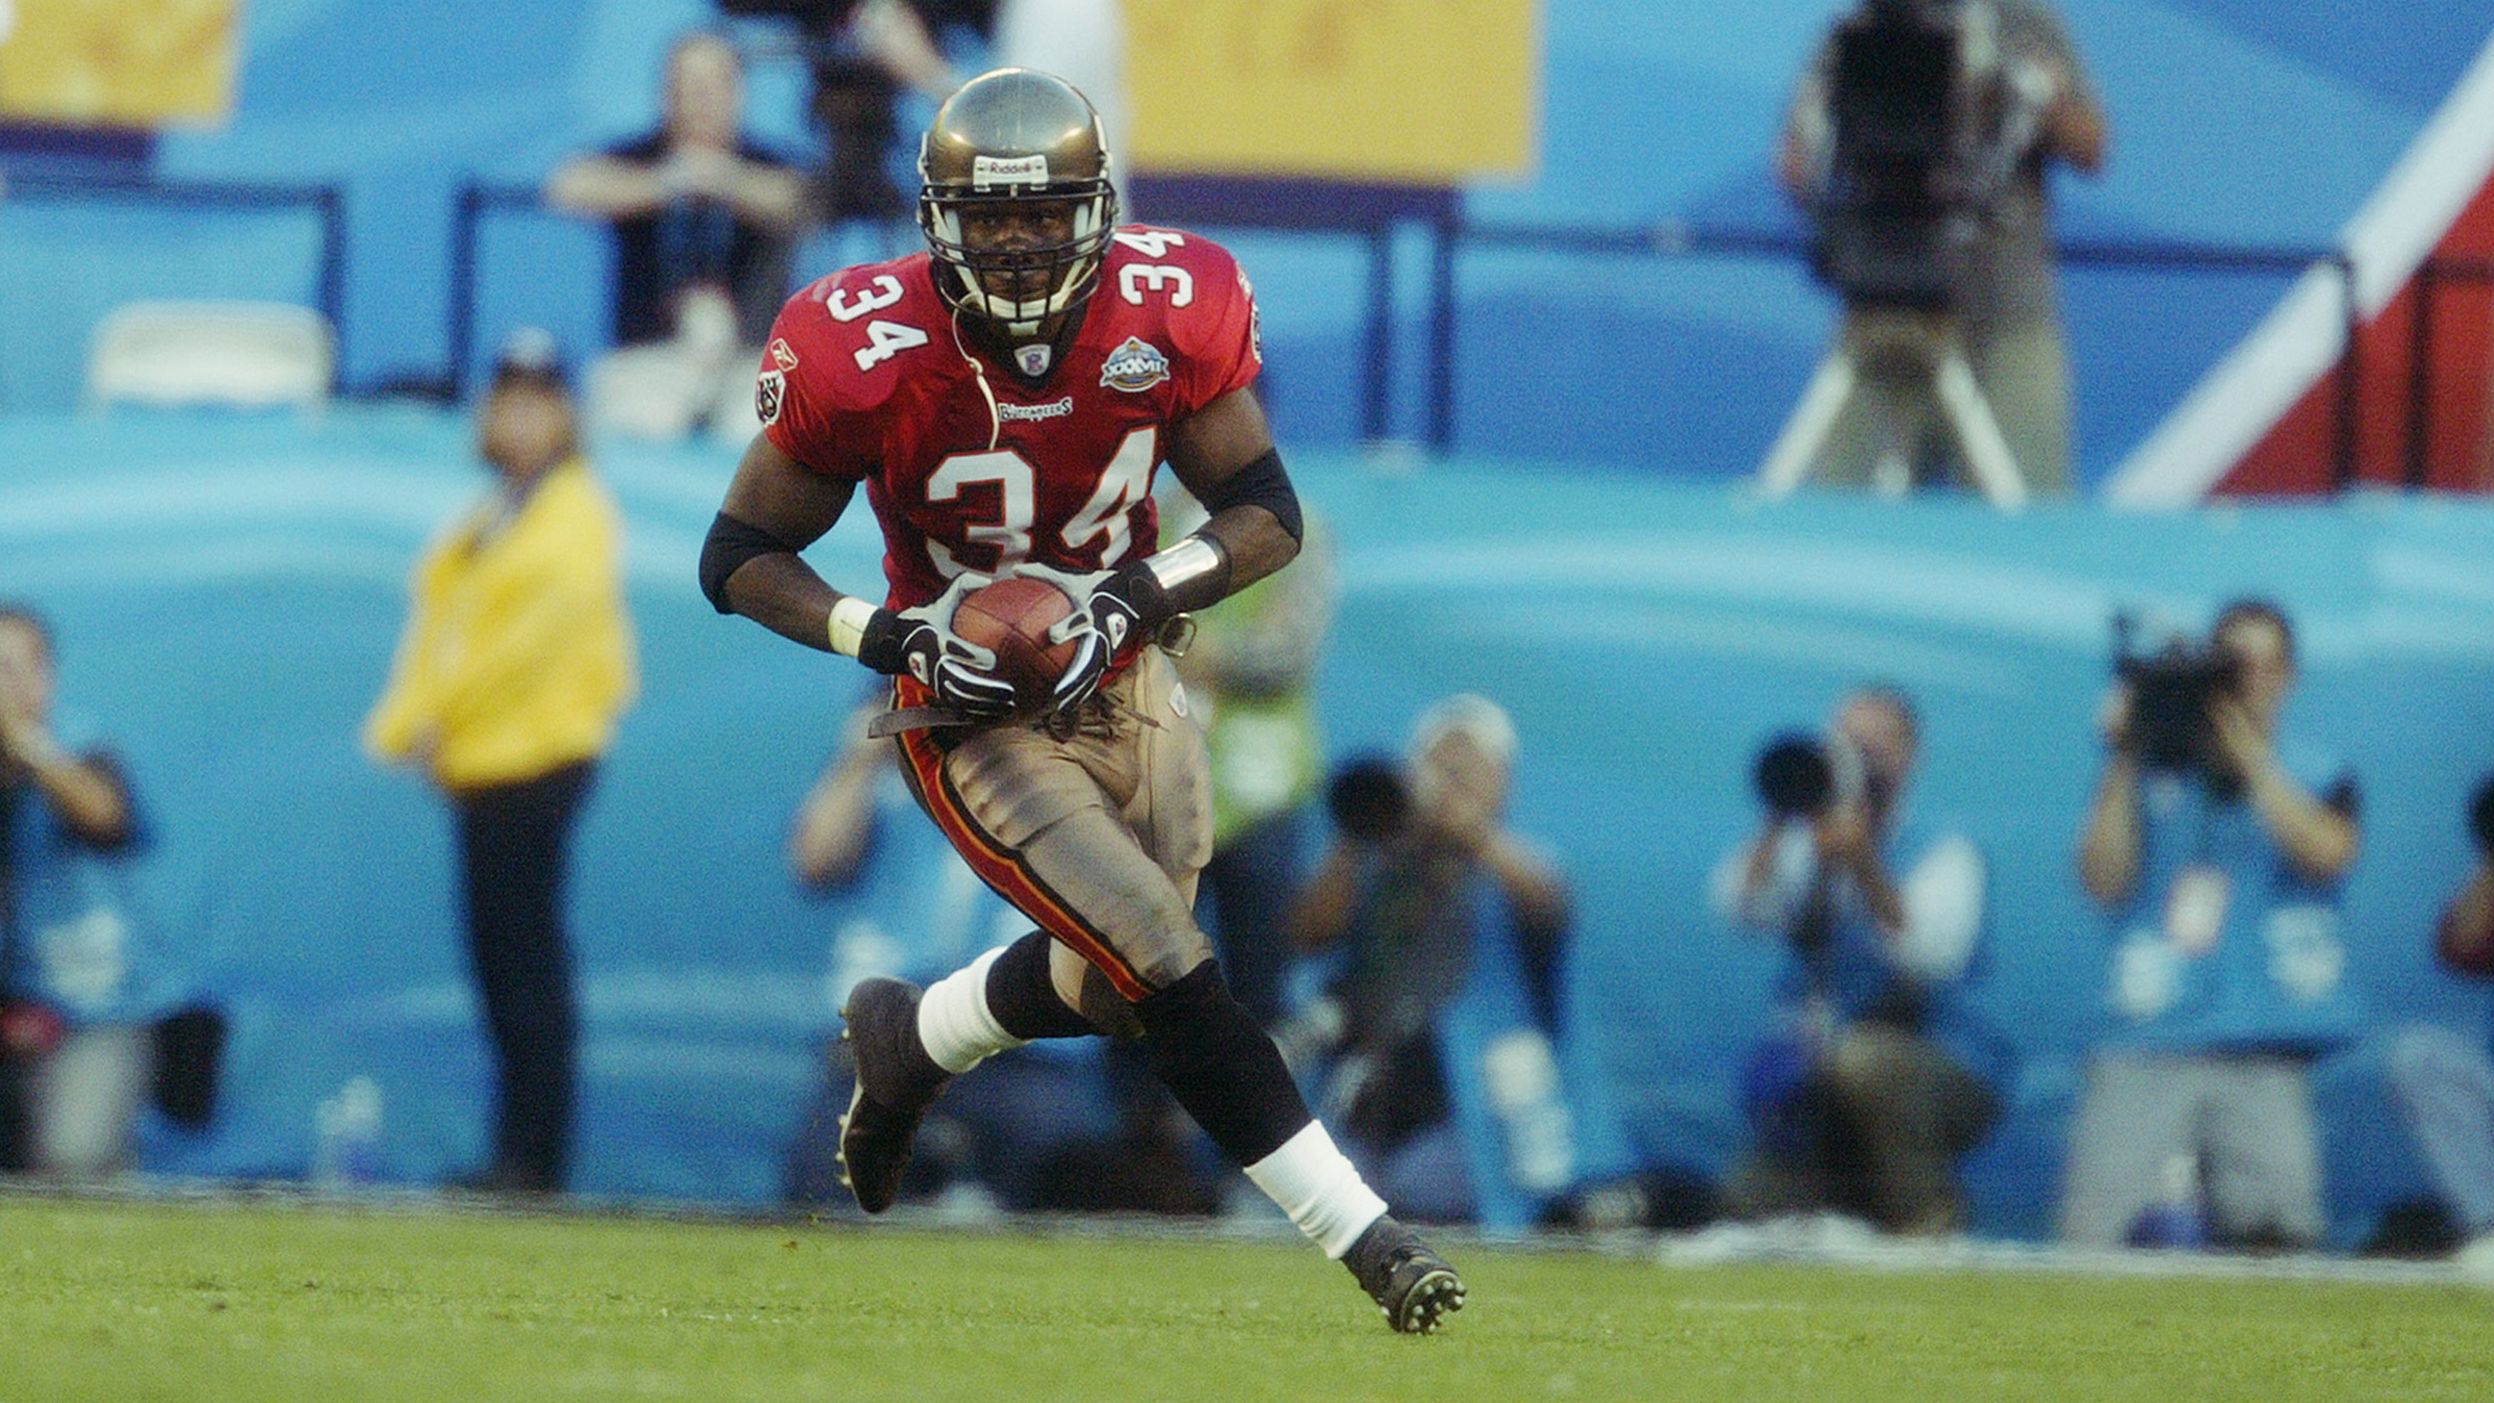 <strong>Super Bowl XXXVII (2003):</strong> Tampa Bay safety Dexter Jackson had two interceptions for a vaunted Buccaneers defense that led the way to a 48-21 victory over Oakland in Super Bowl XXXVII.